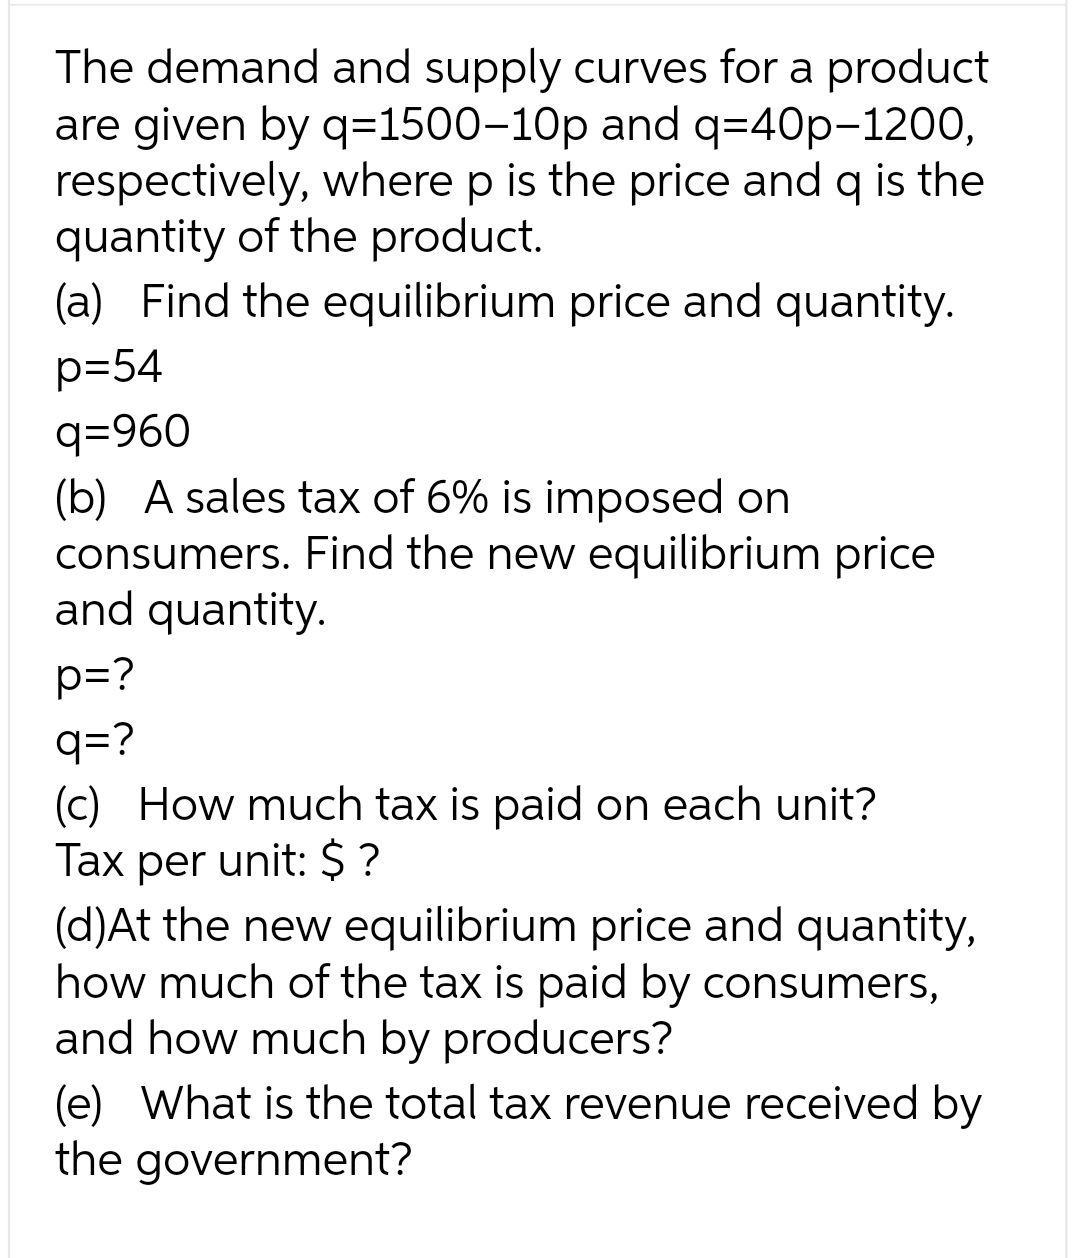 The demand and supply curves for a product
are given by q=1500-10p and q=40p-1200,
respectively, where p is the price and q is the
quantity of the product.
(a) Find the equilibrium price and quantity.
p=54
q=960
(b) A sales tax of 6% is imposed on
consumers. Find the new equilibrium price
and quantity.
p=?
q=?
(c) How much tax is paid on each unit?
Tax per unit: $?
(d)At the new equilibrium price and quantity,
how much of the tax is paid by consumers,
and how much by producers?
(e) What is the total tax revenue received by
the government?